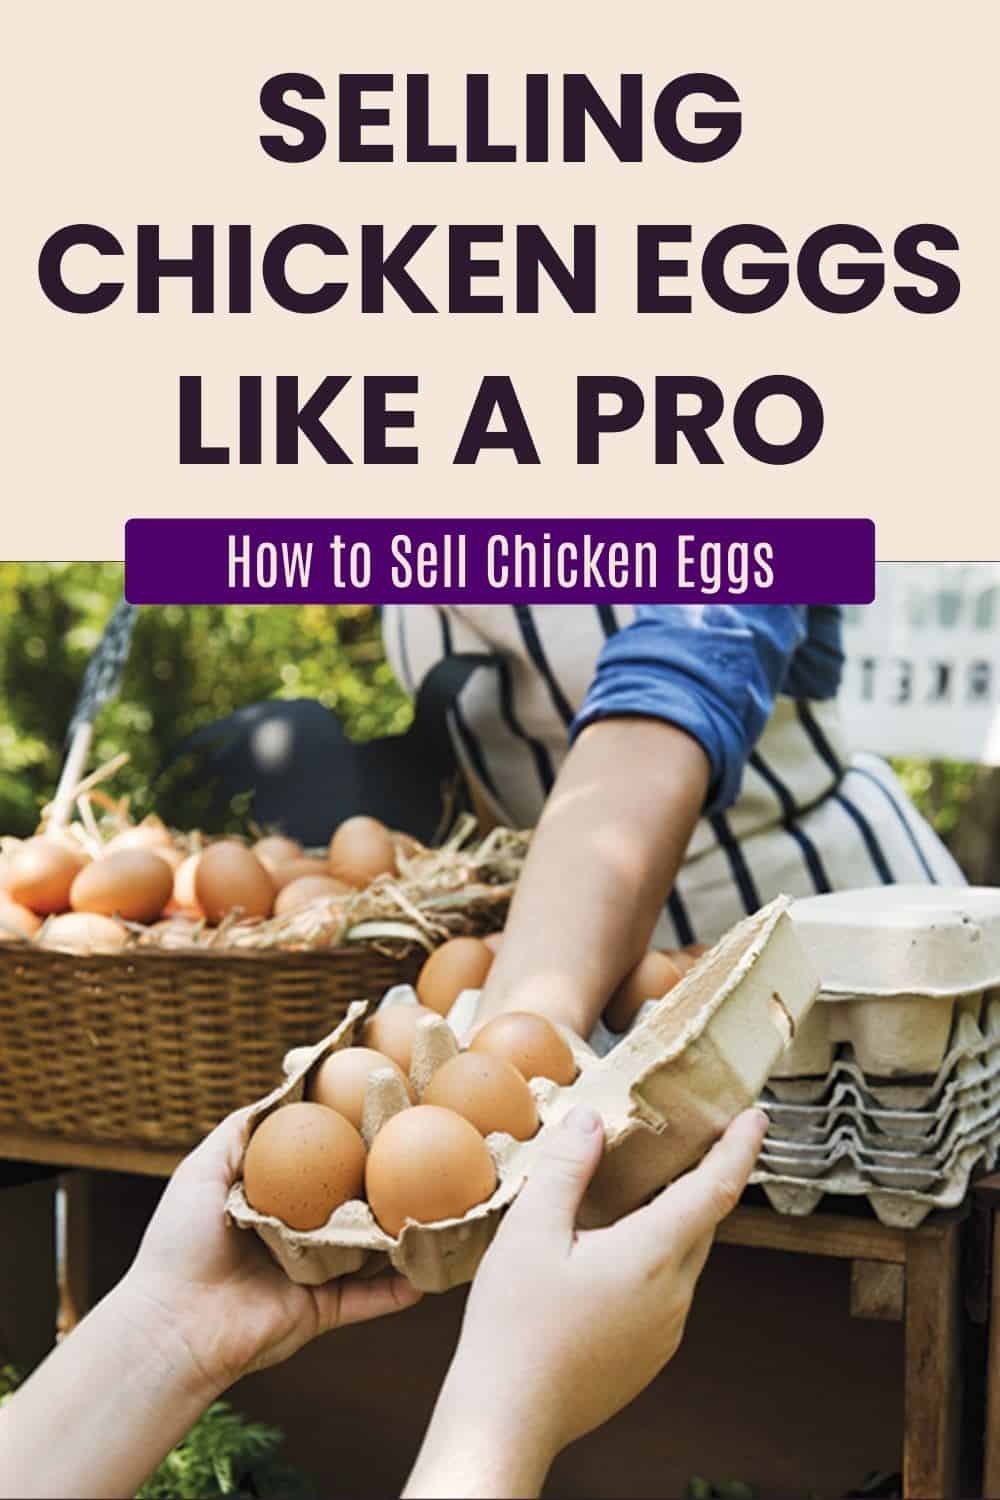 How to Sell Chicken Eggs